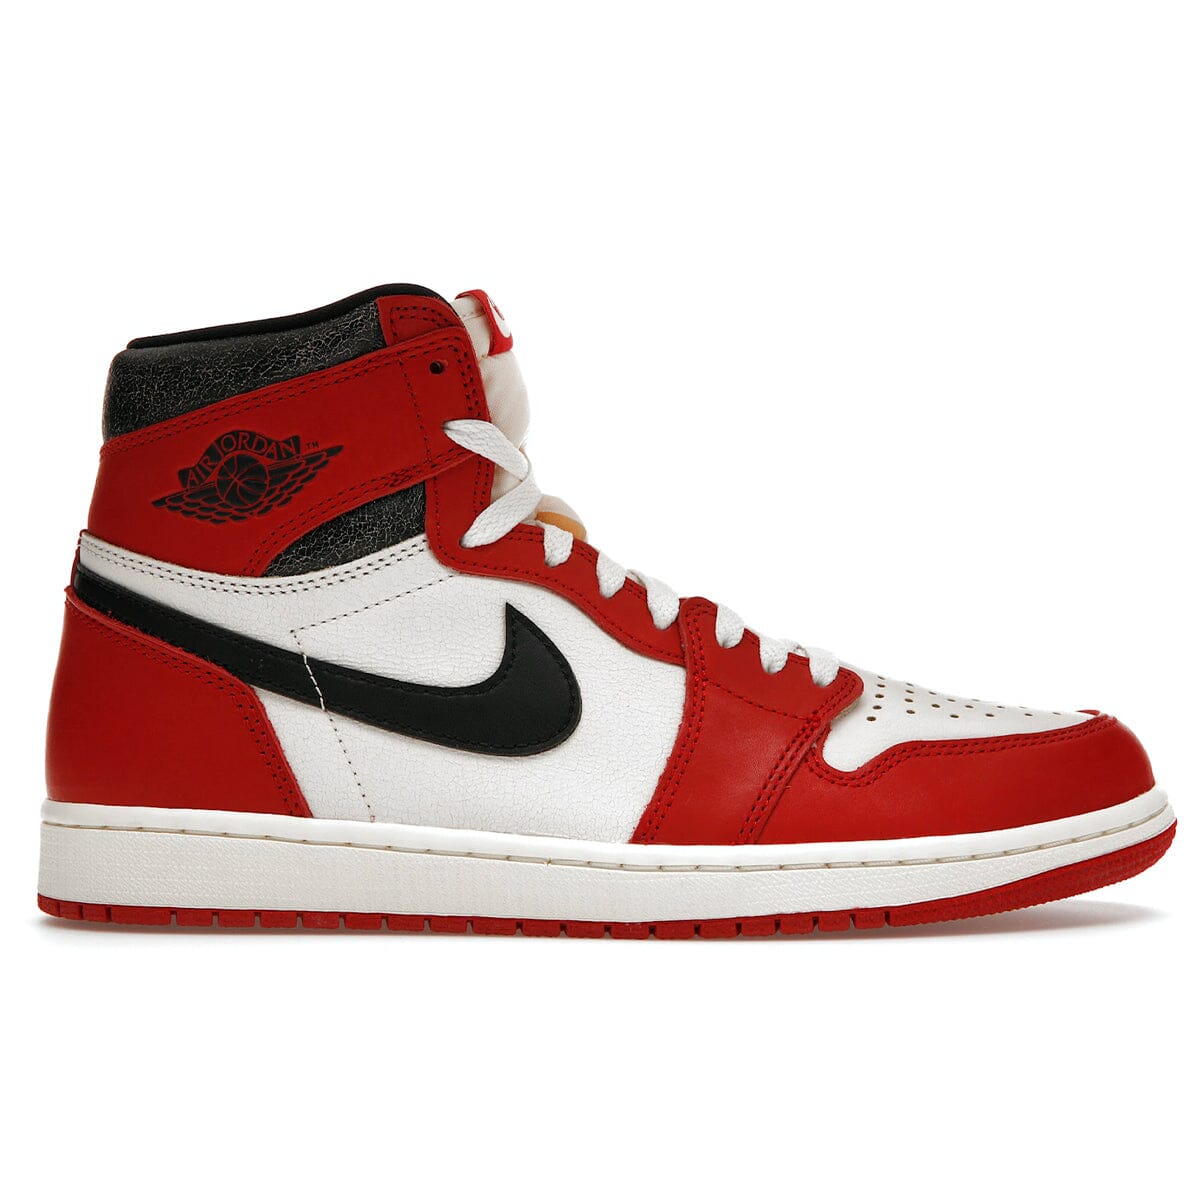 Air Jordan 1 Retro High OG Chicago Lost and Found Blizz Sneakers 